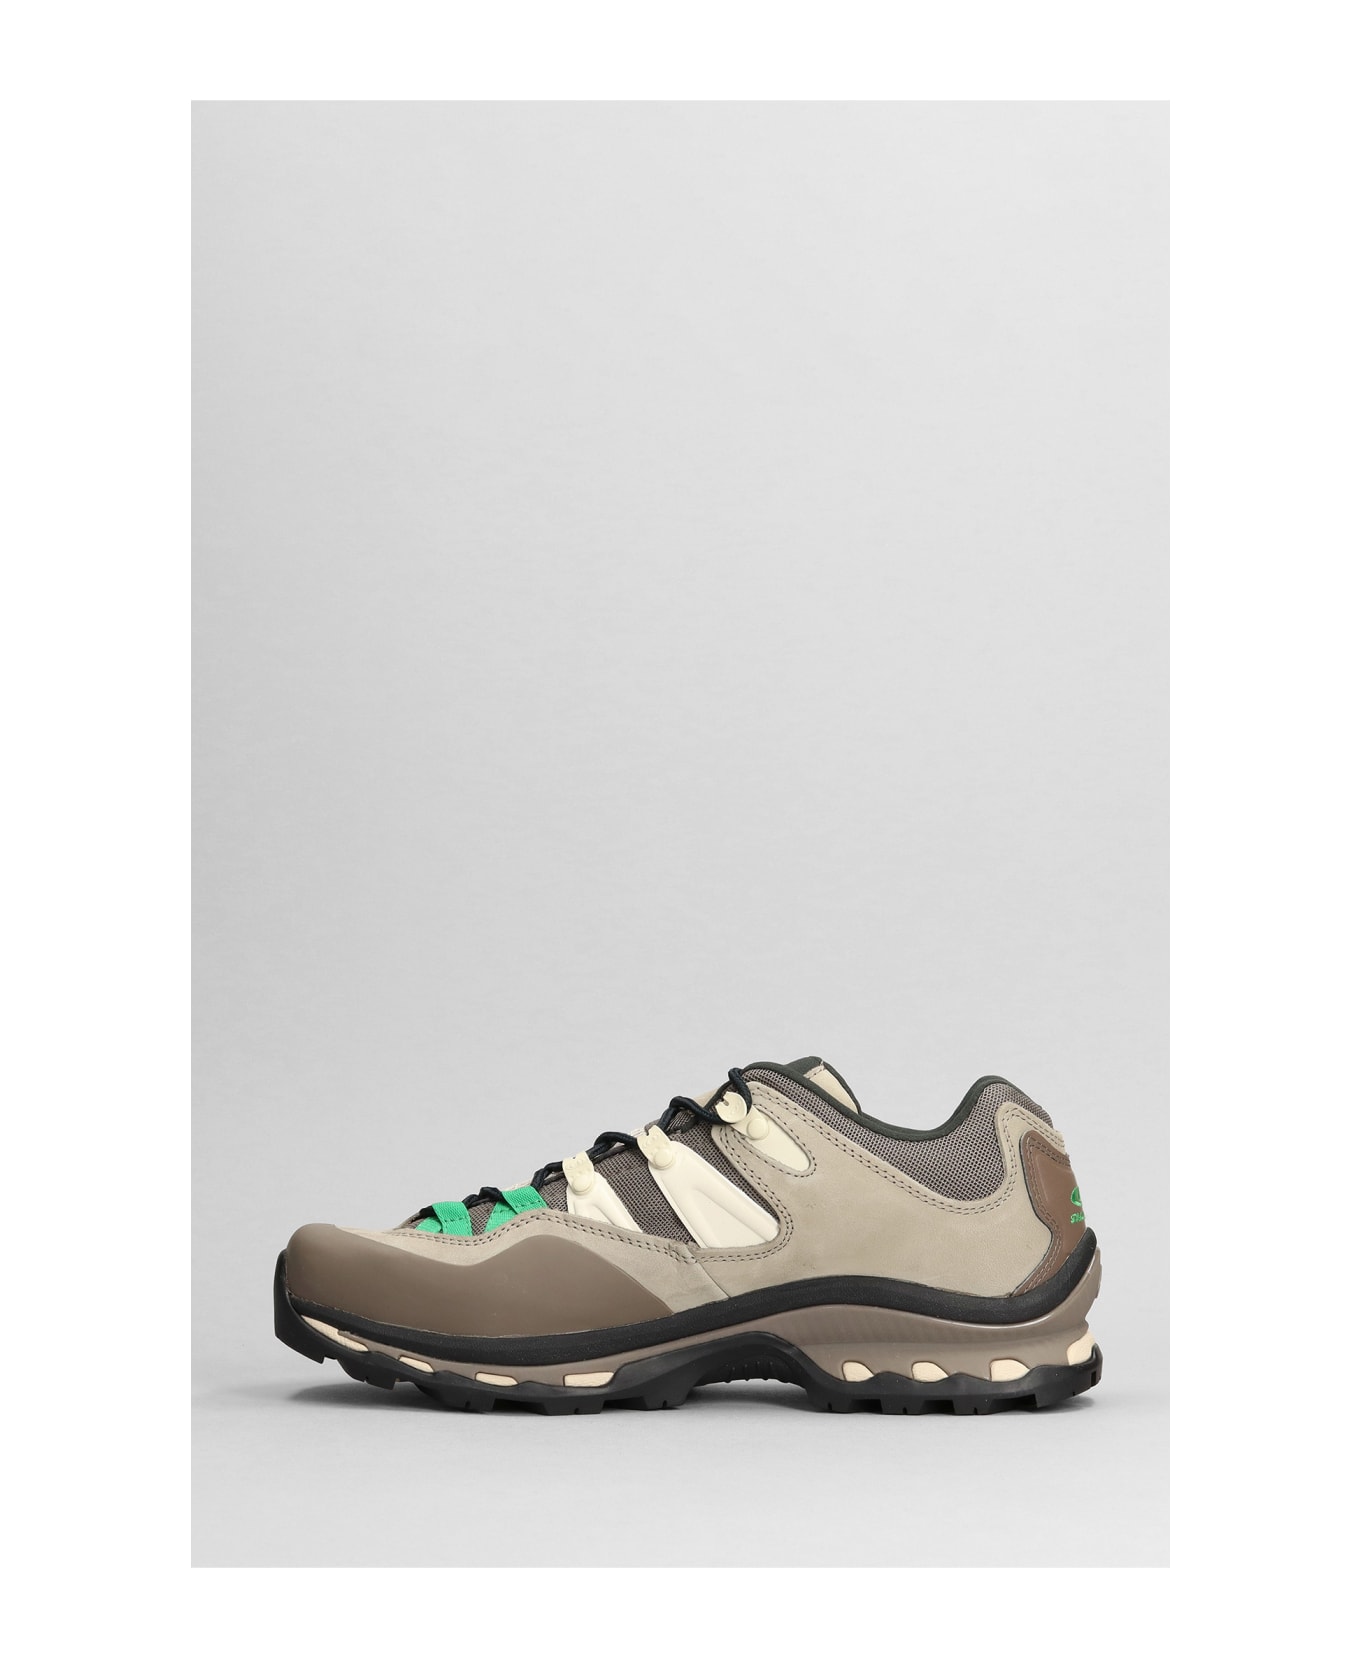 Salomon Xt-quest 2 Sneakers In Brown Leather And Fabric - Falcon/cement/bright green